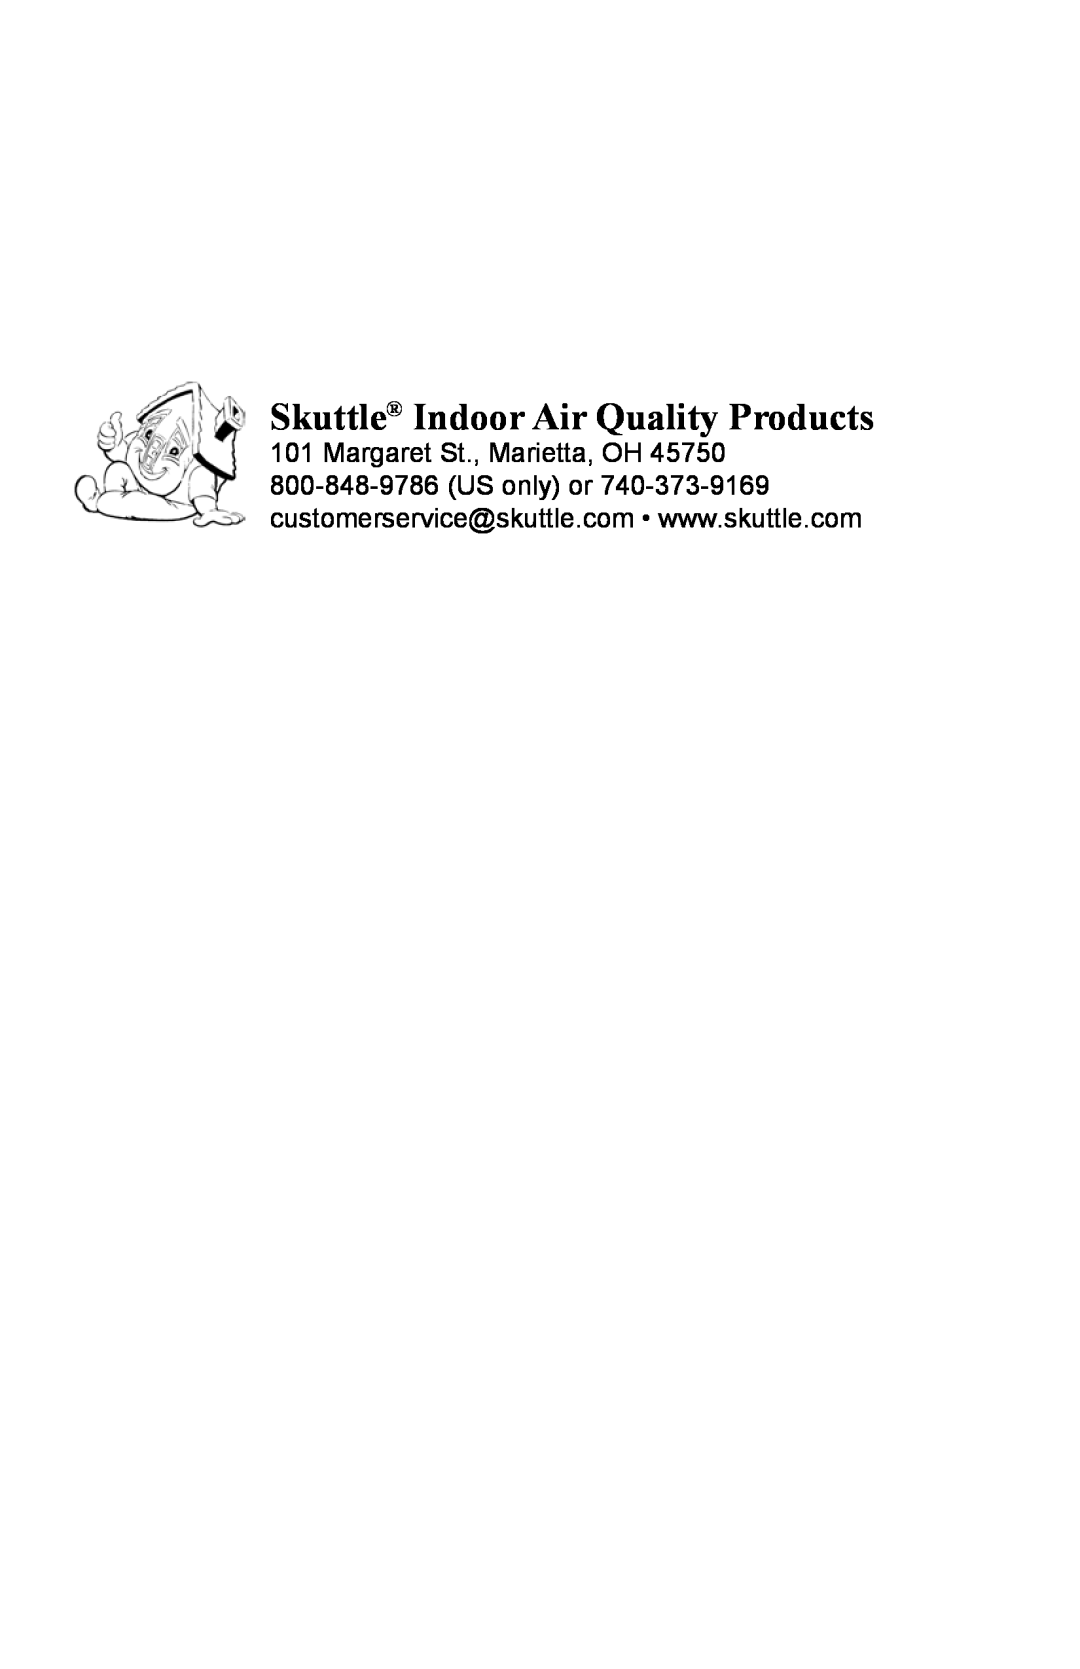 Skuttle Indoor Air Quality Products 2100, 2102 owner manual Skuttle Indoor Air Quality Products, Margaret St., Marietta, OH 